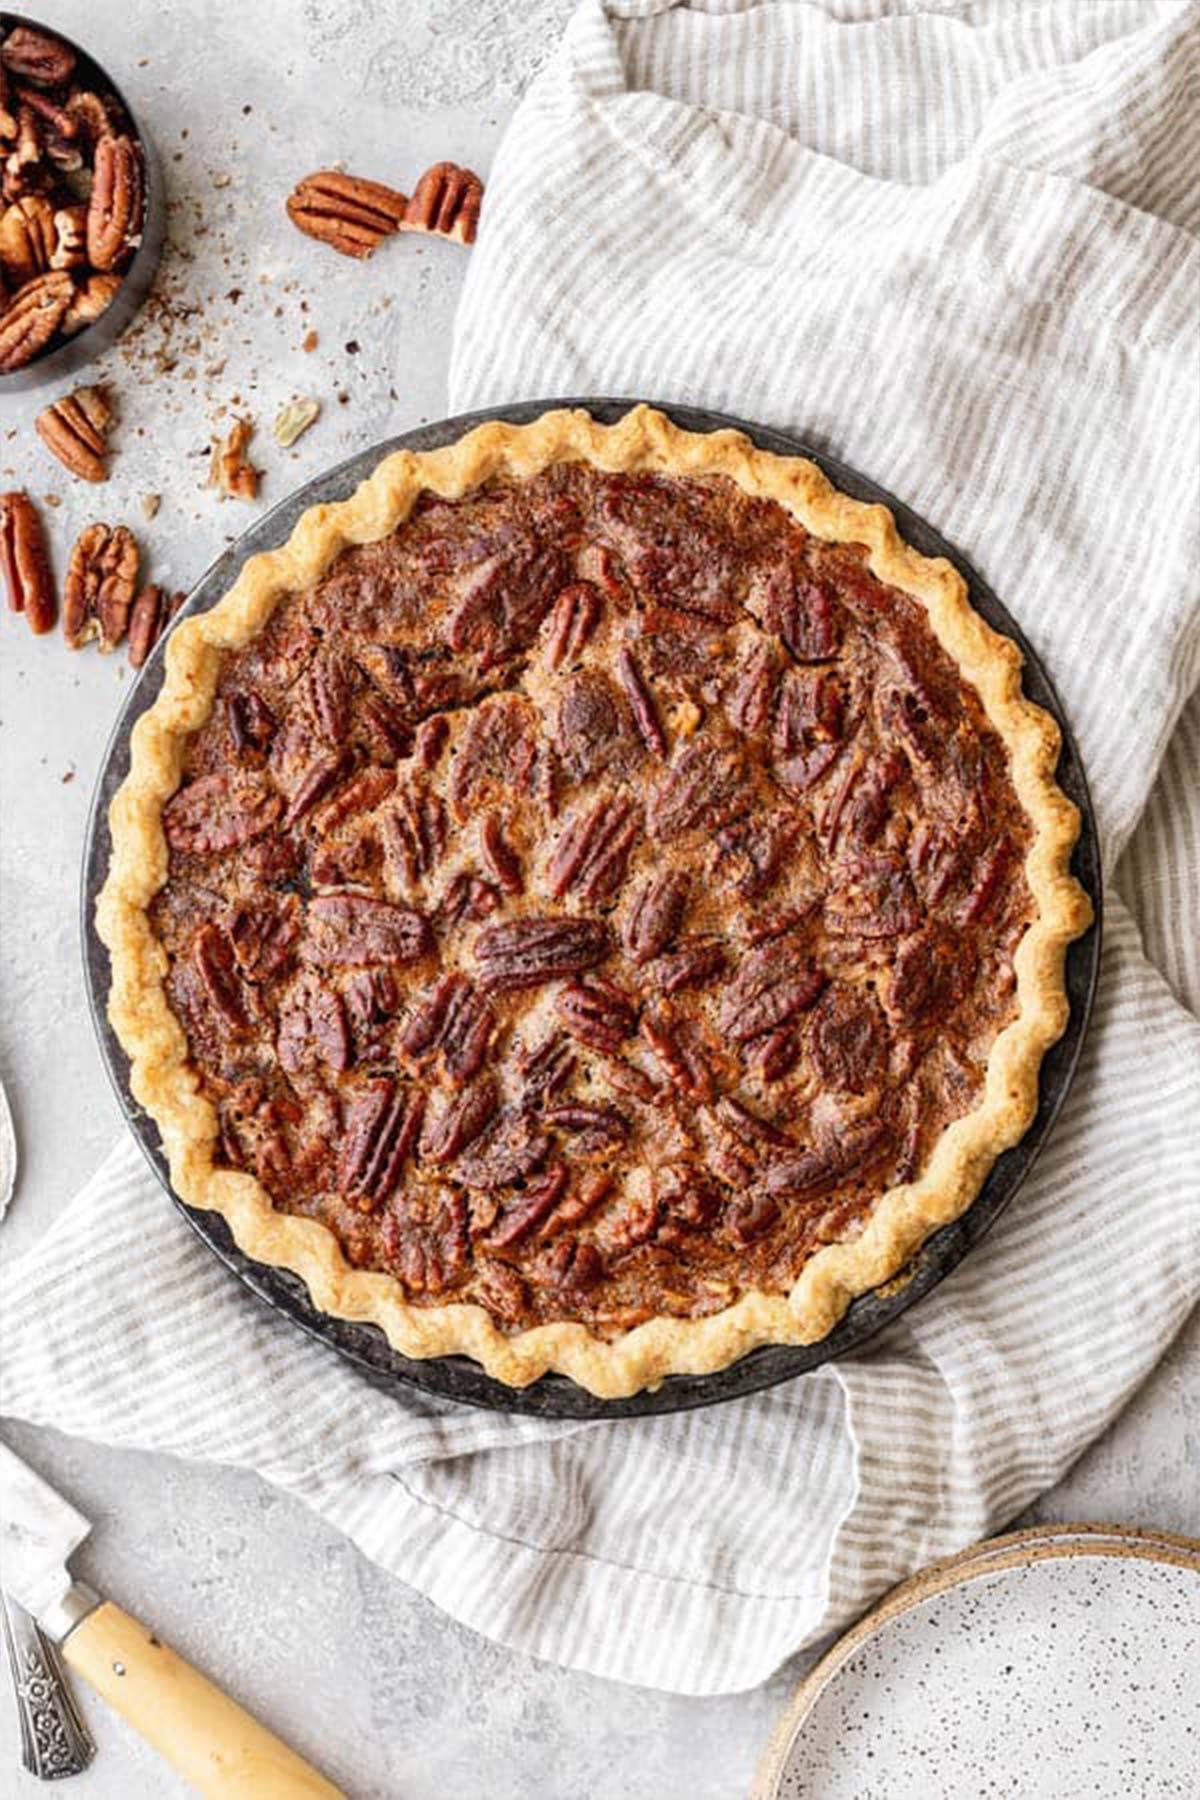 A whole Southern Pecan Pie in homemade butter crust with a bowl of pecans nearby against white background